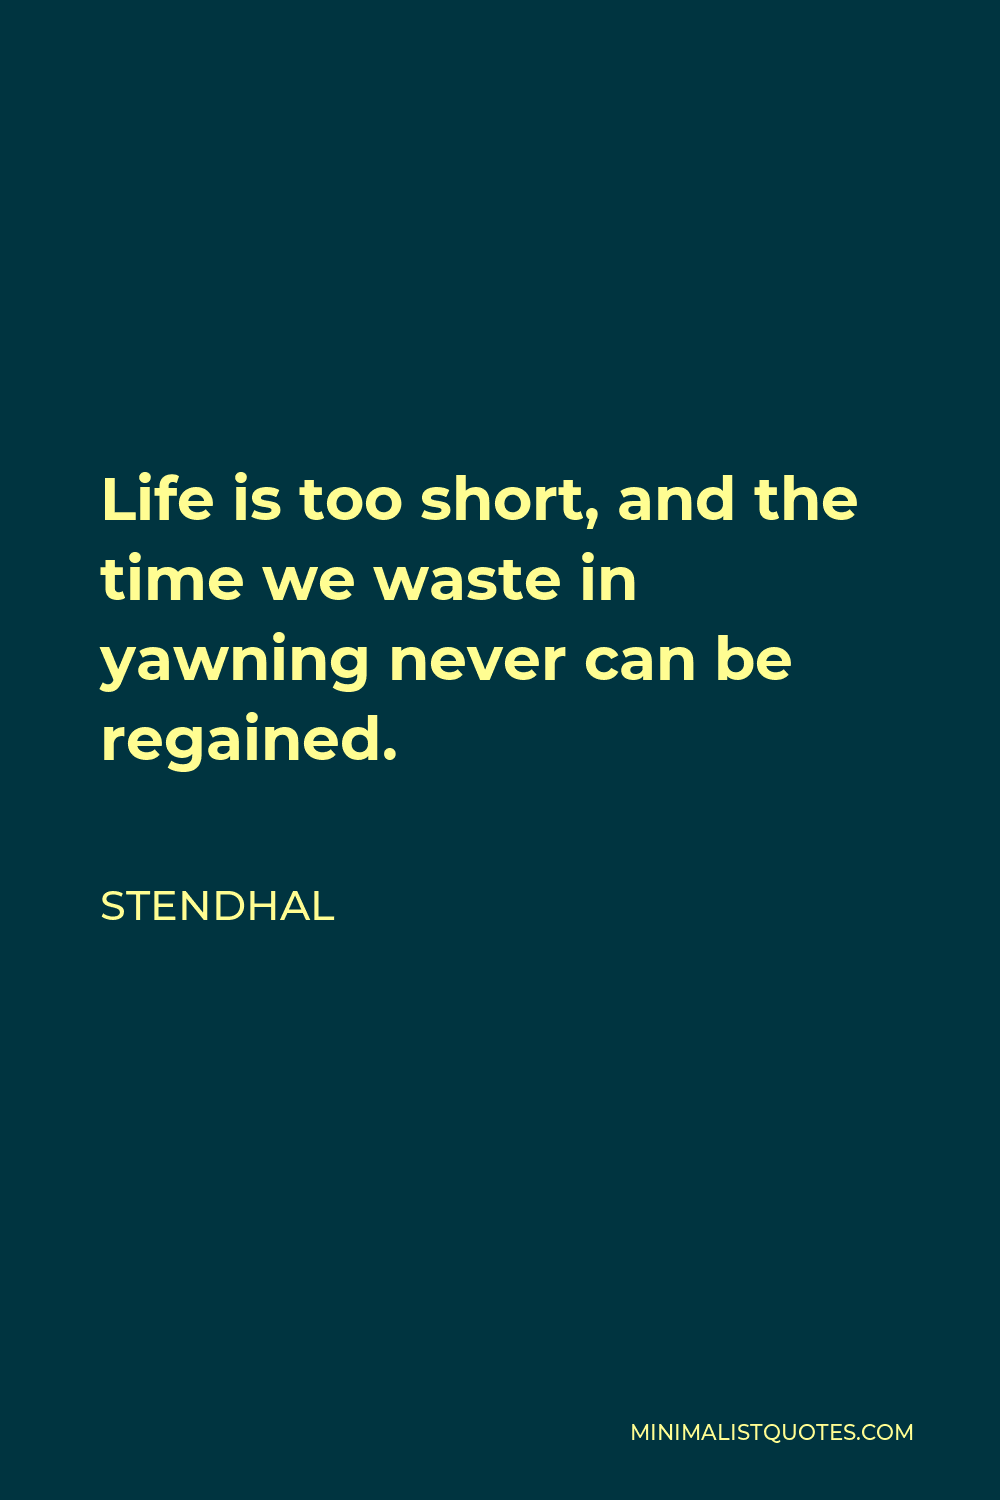 Stendhal Quote - Life is too short, and the time we waste in yawning never can be regained.